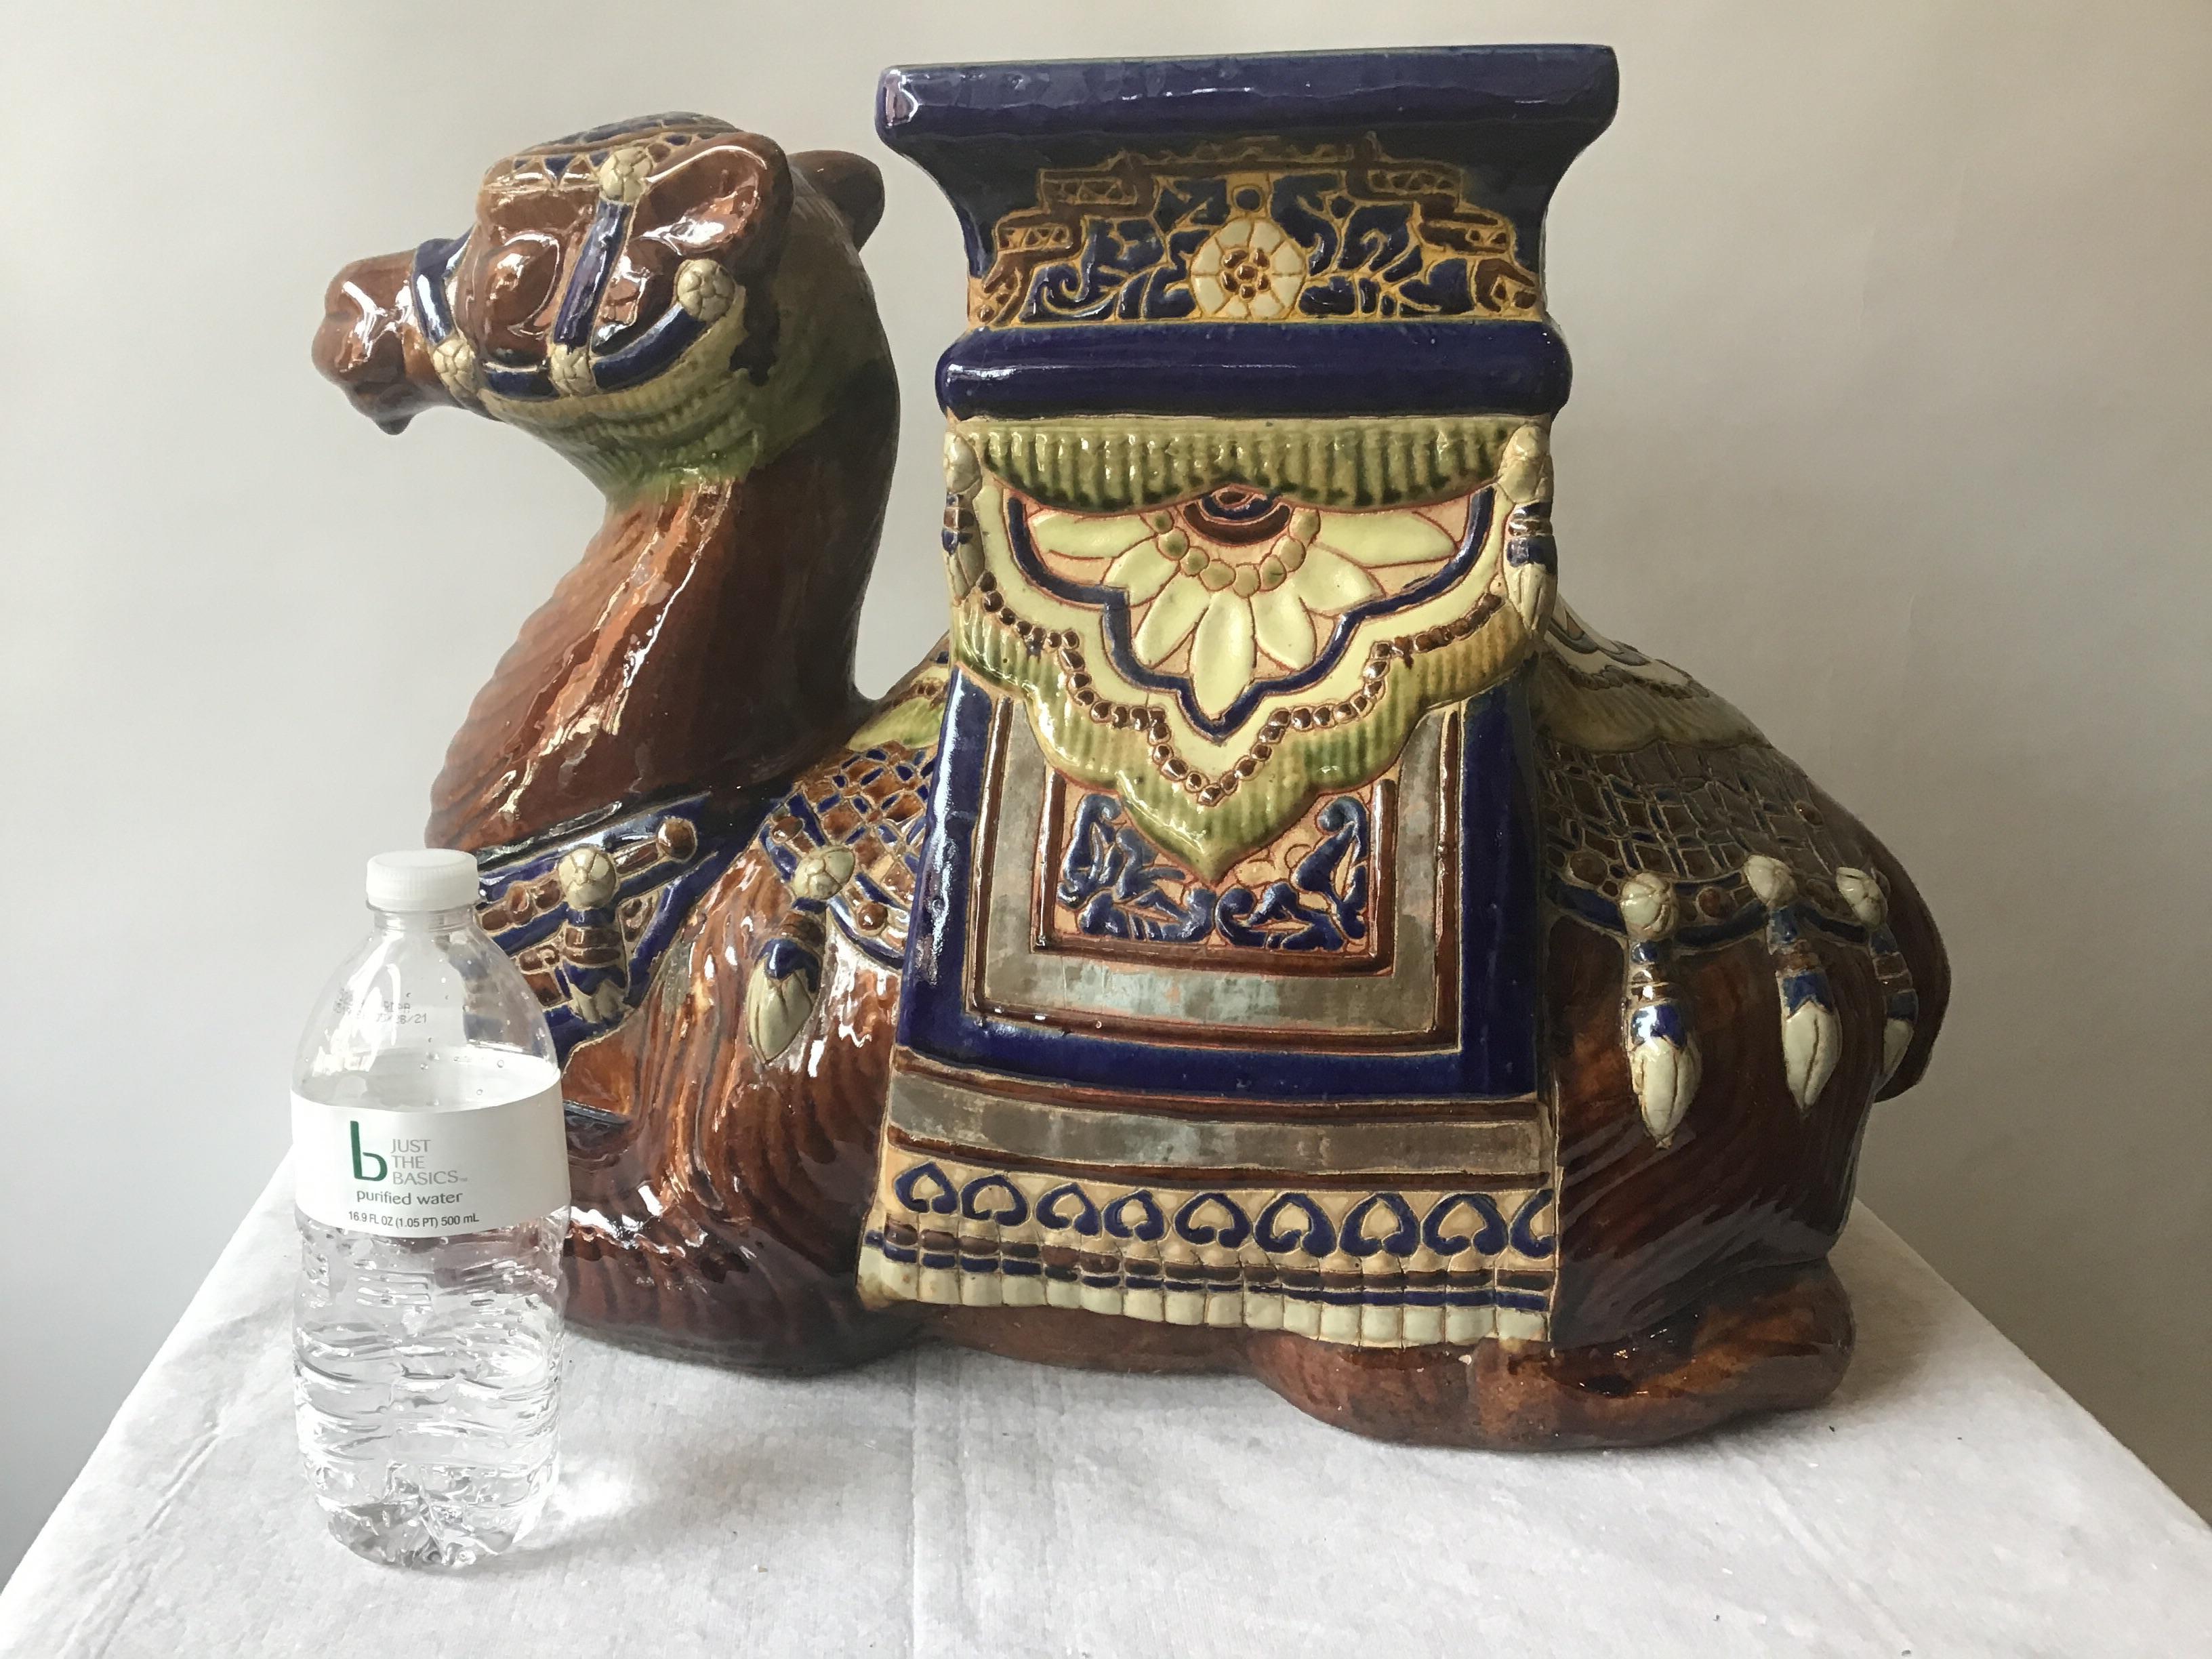 1960s ceramic camel garden seat/side table. 2 chips in finish where camel was colored in as shown in image 7 and 8.